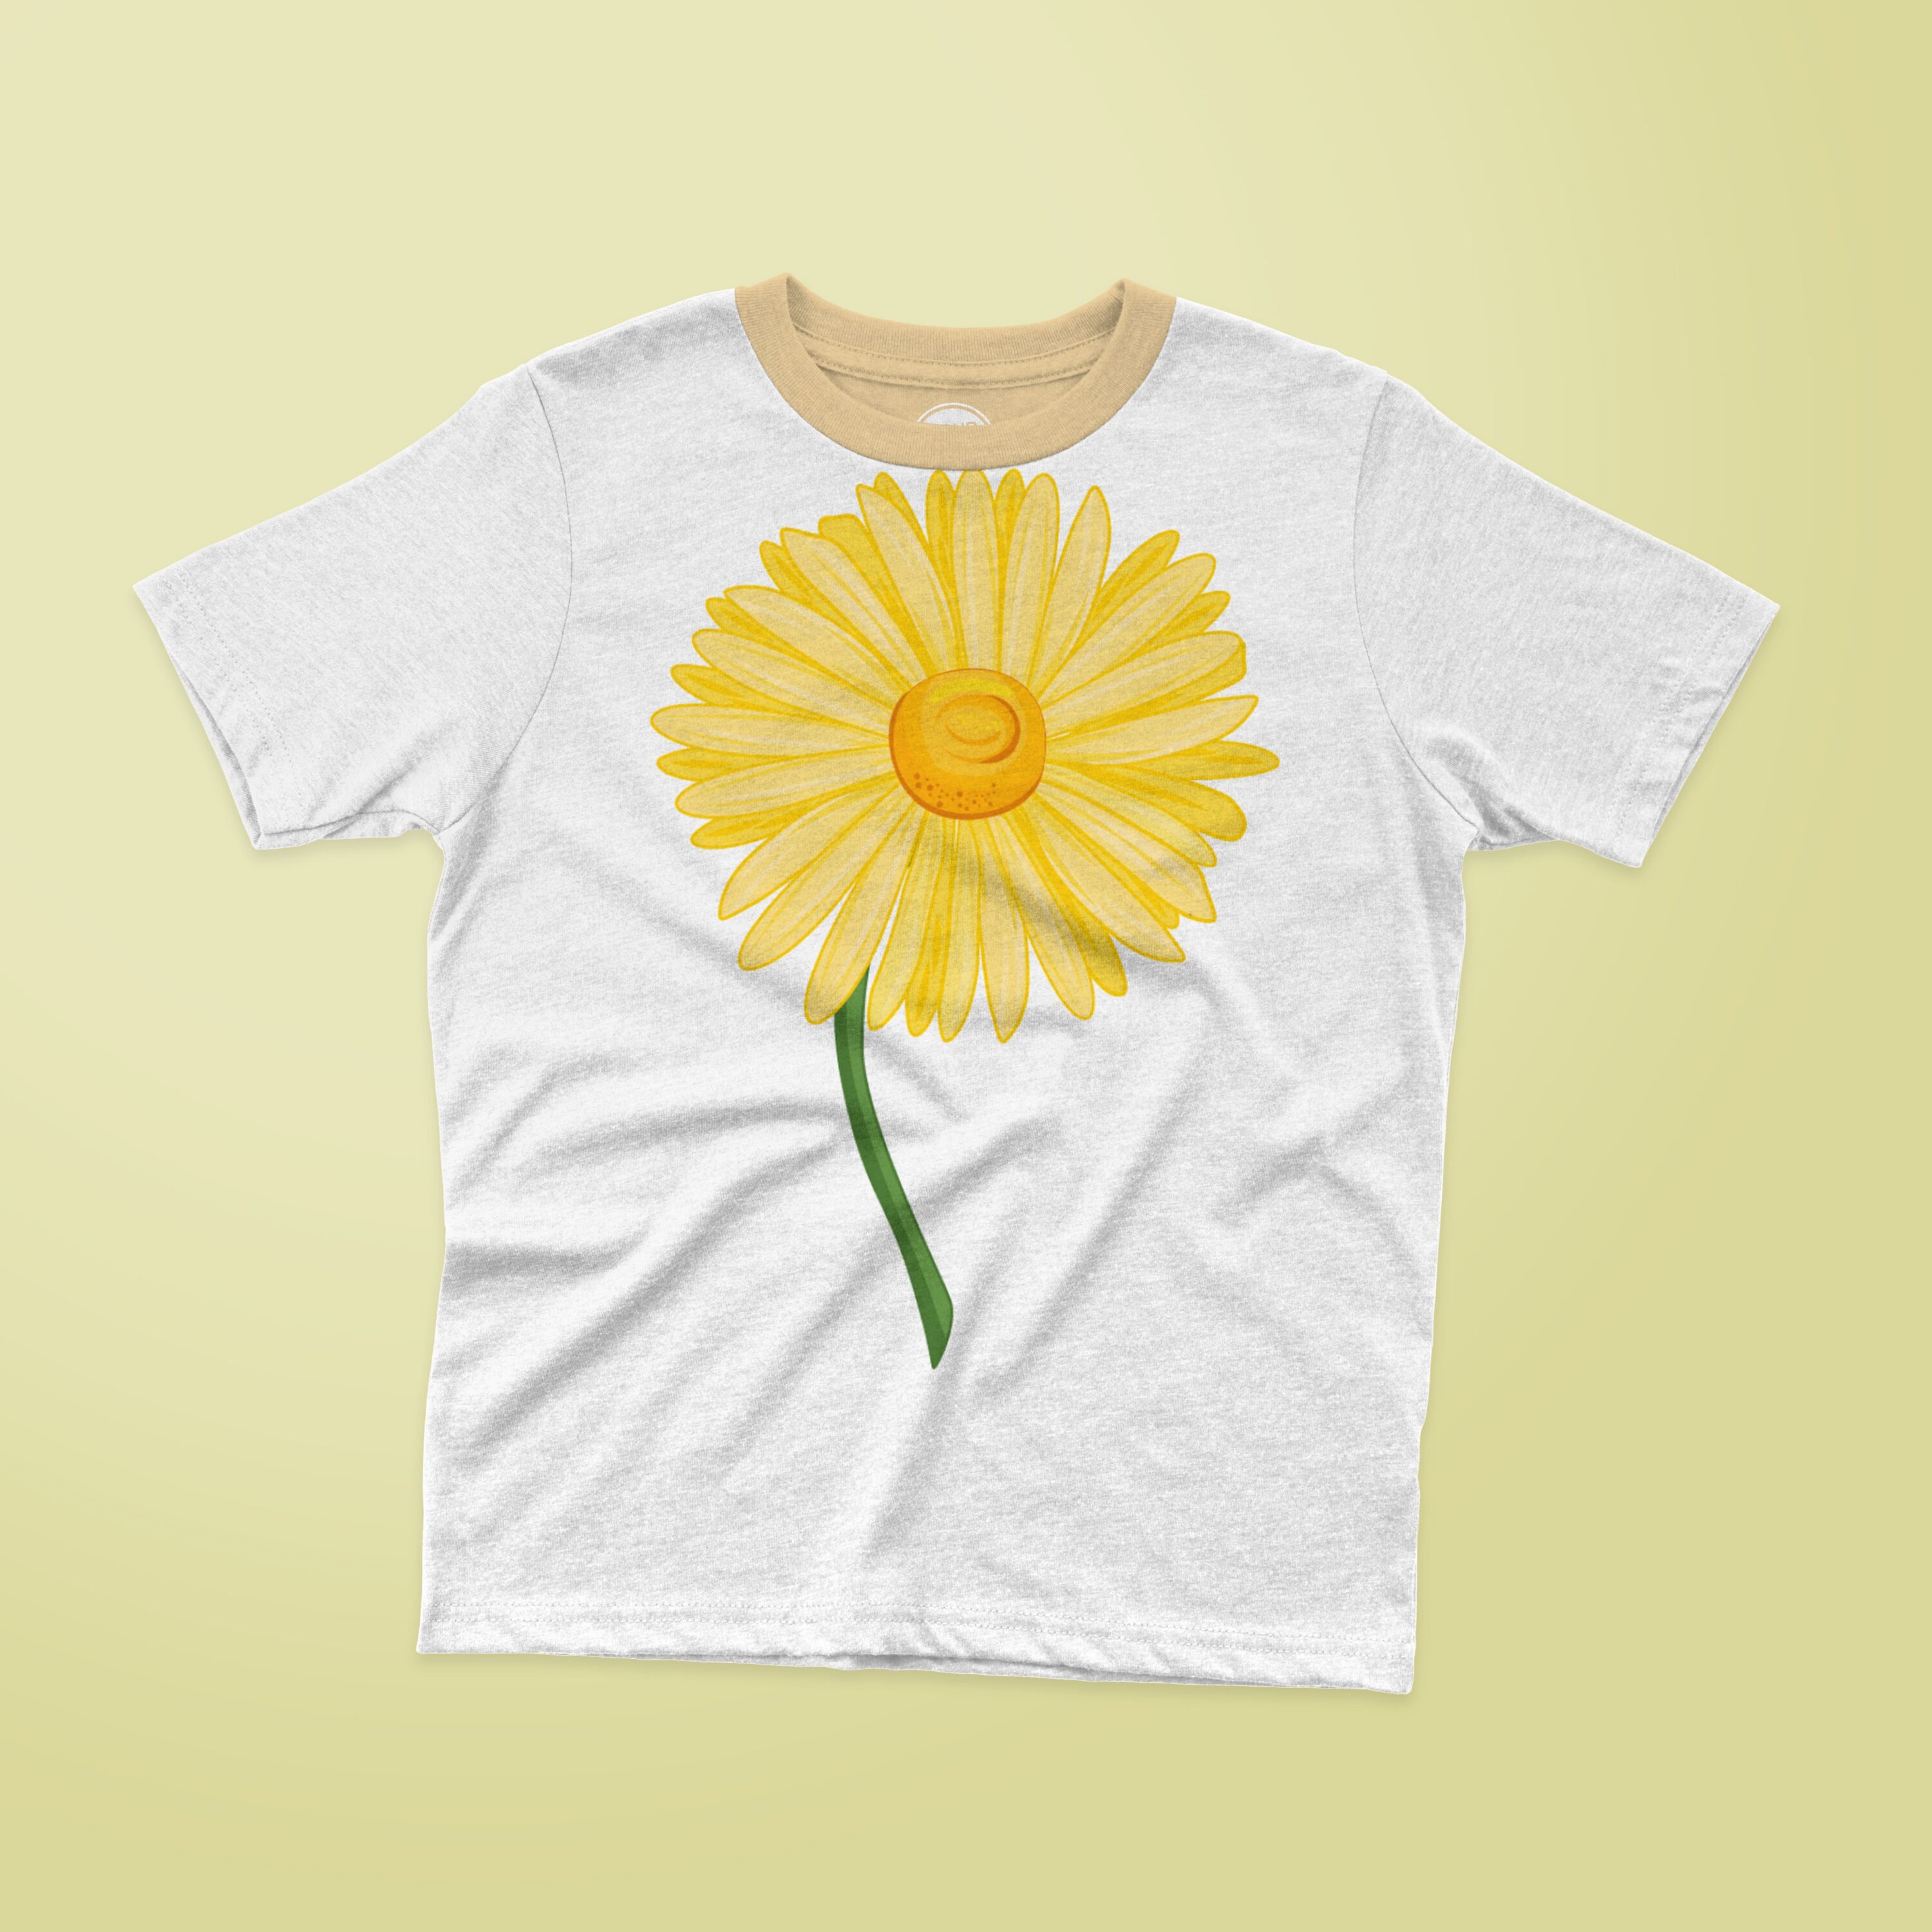 Yellow gerber daisy printed on the t-shirt.